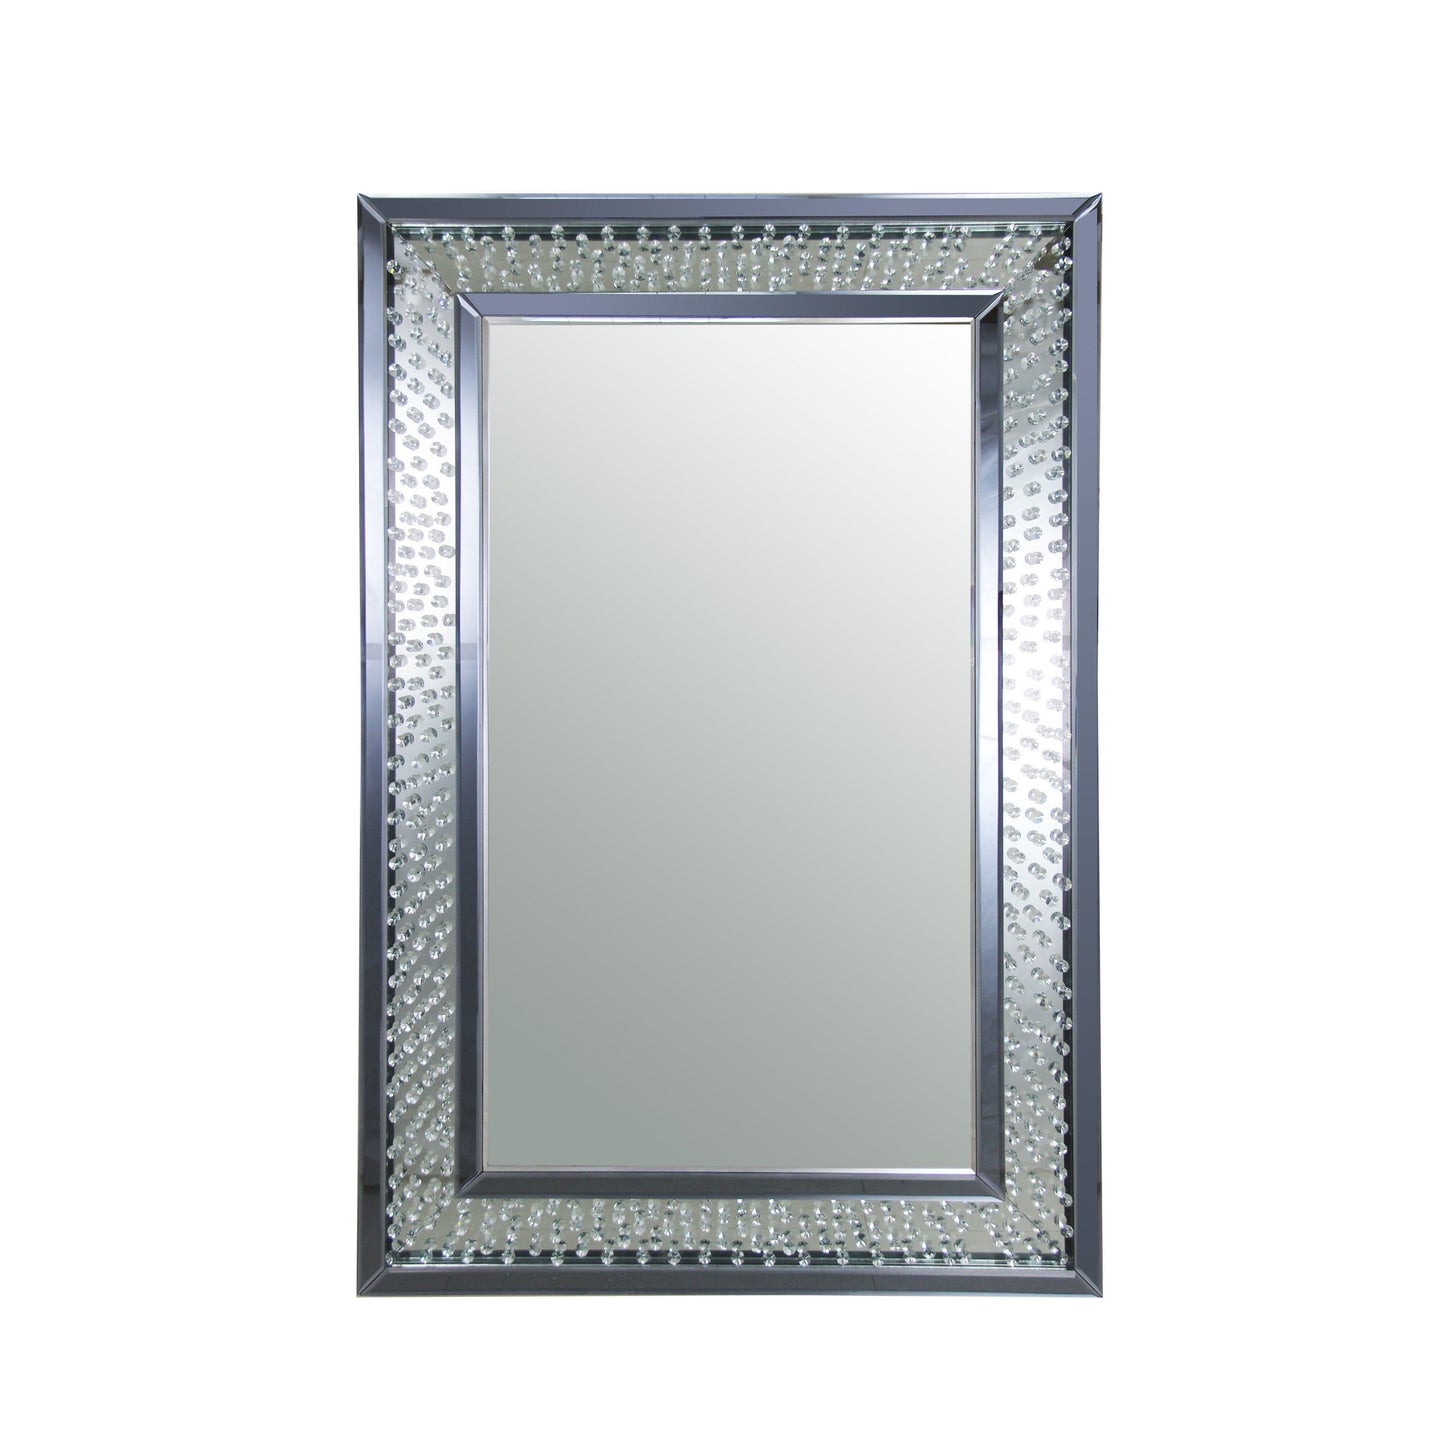 Benzara Silver Rectangular Wall Accent Mirror With Crystal Insert Frame